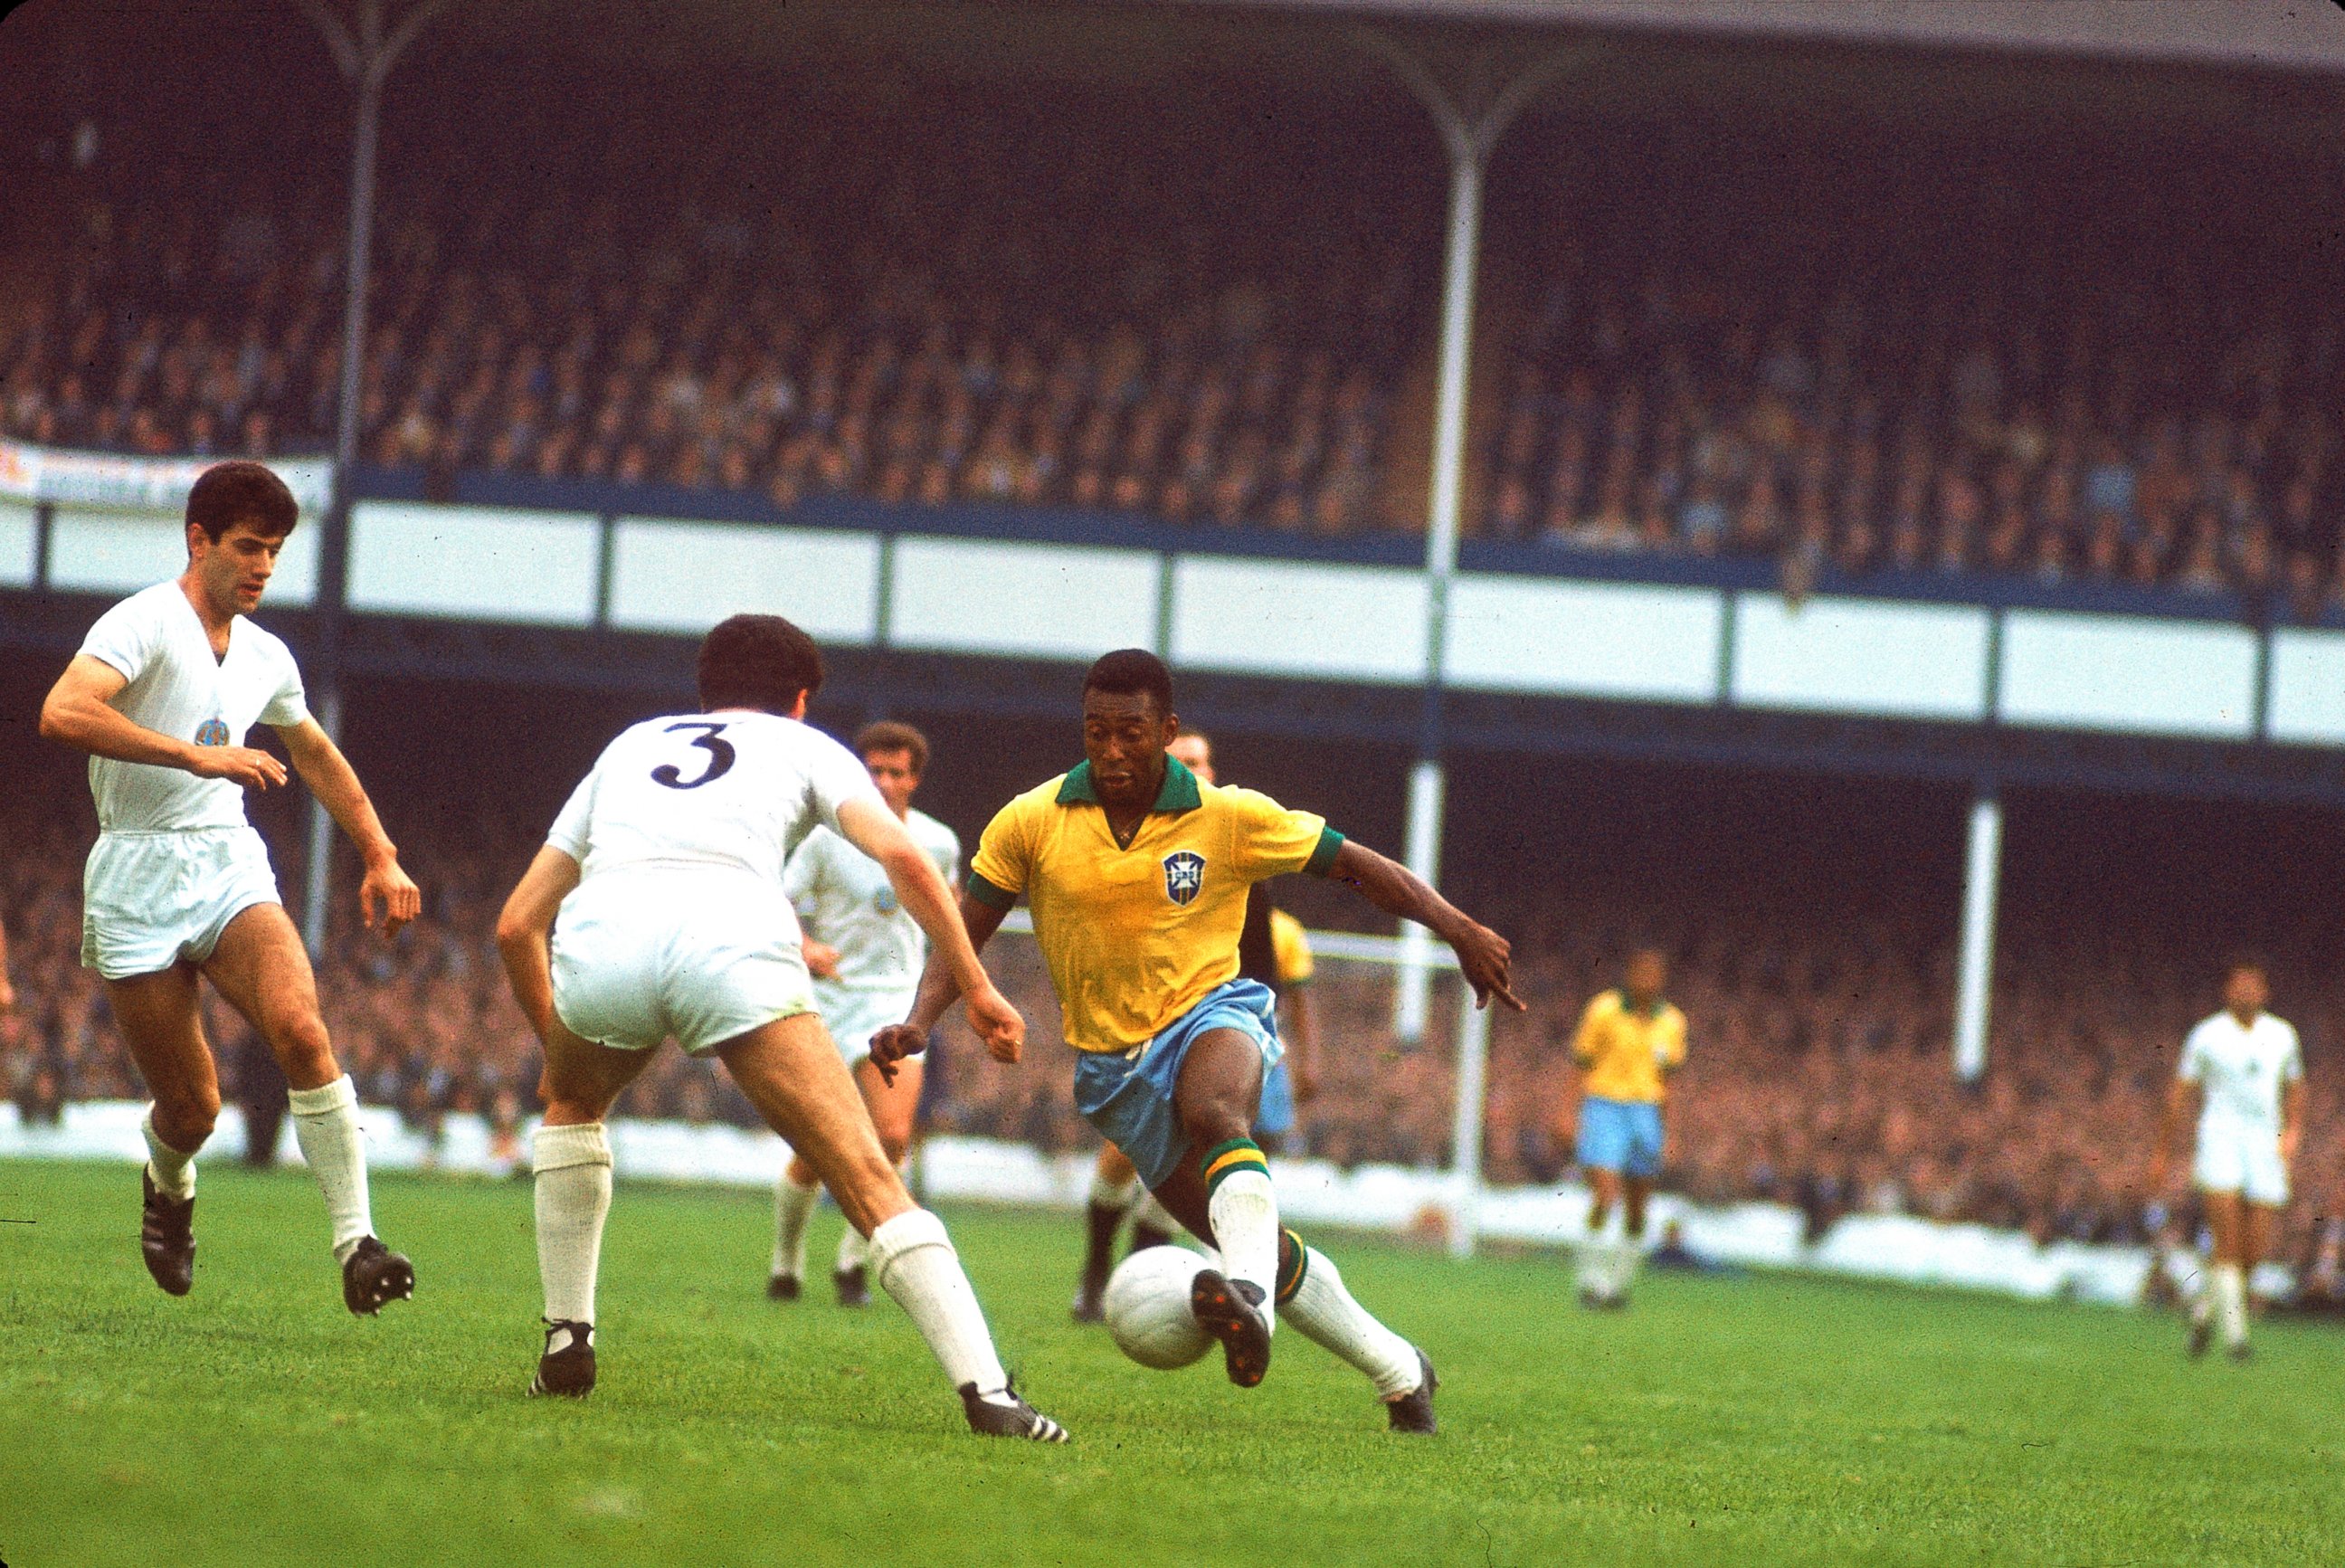 PHOTO: Brazilian soccer (football) star Pele (center, in yellow jersey) controls the ball for Brazil at Goodison Park during a match against Hungary in the 1966 World Cup tournament, Liverpool, England, in this July 15, 1966, file photo.